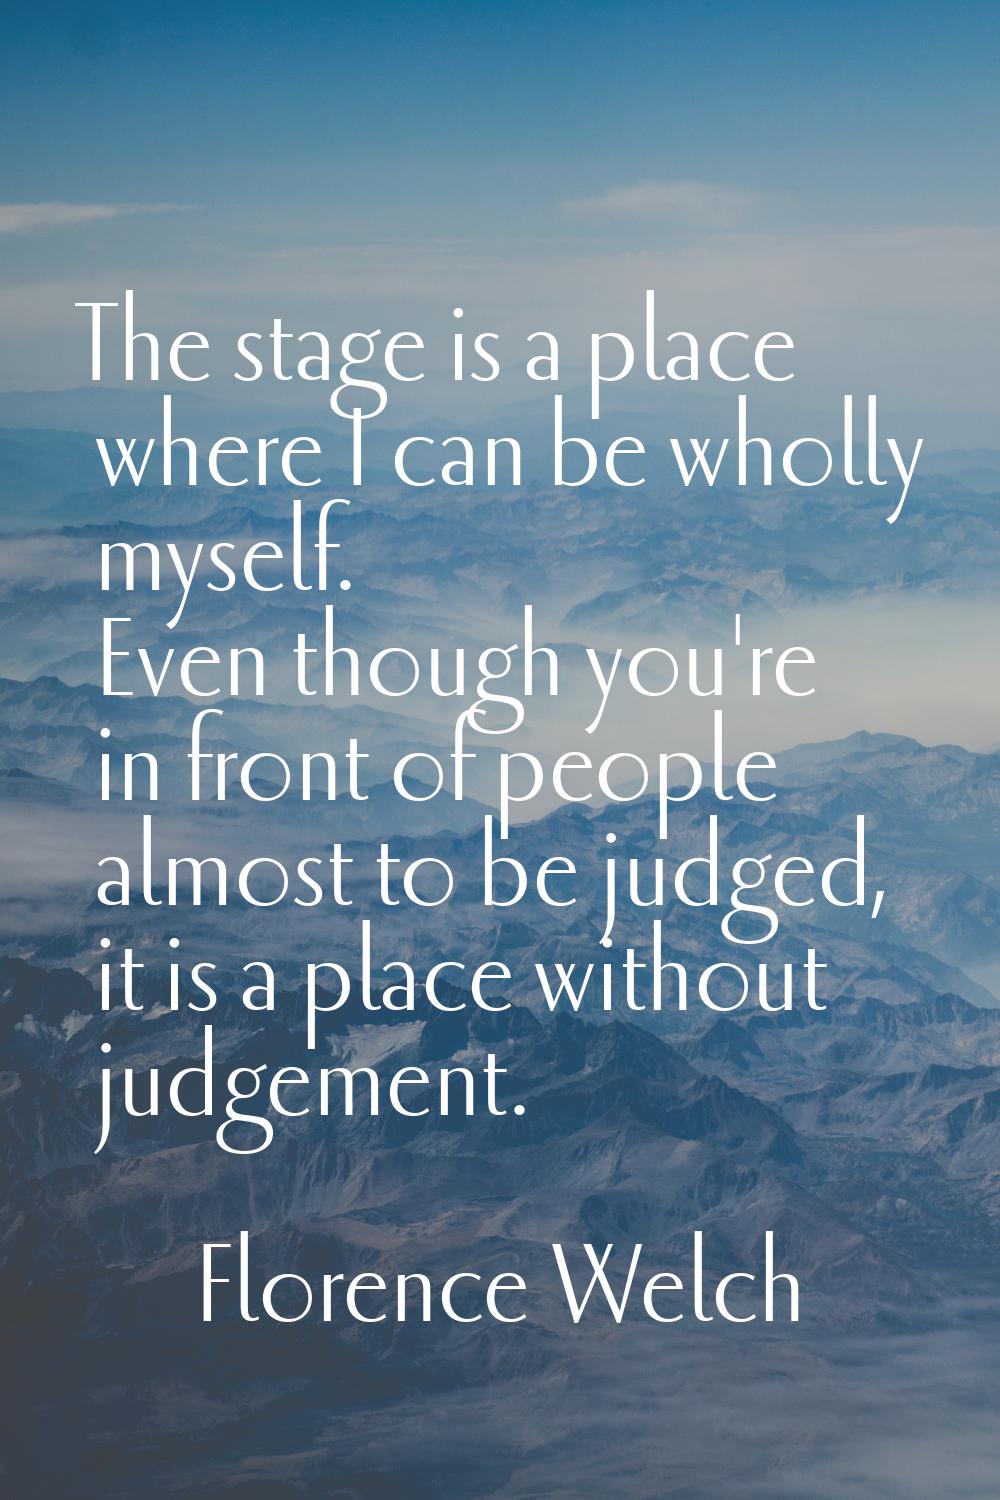 The stage is a place where I can be wholly myself. Even though you're in front of people almost to 